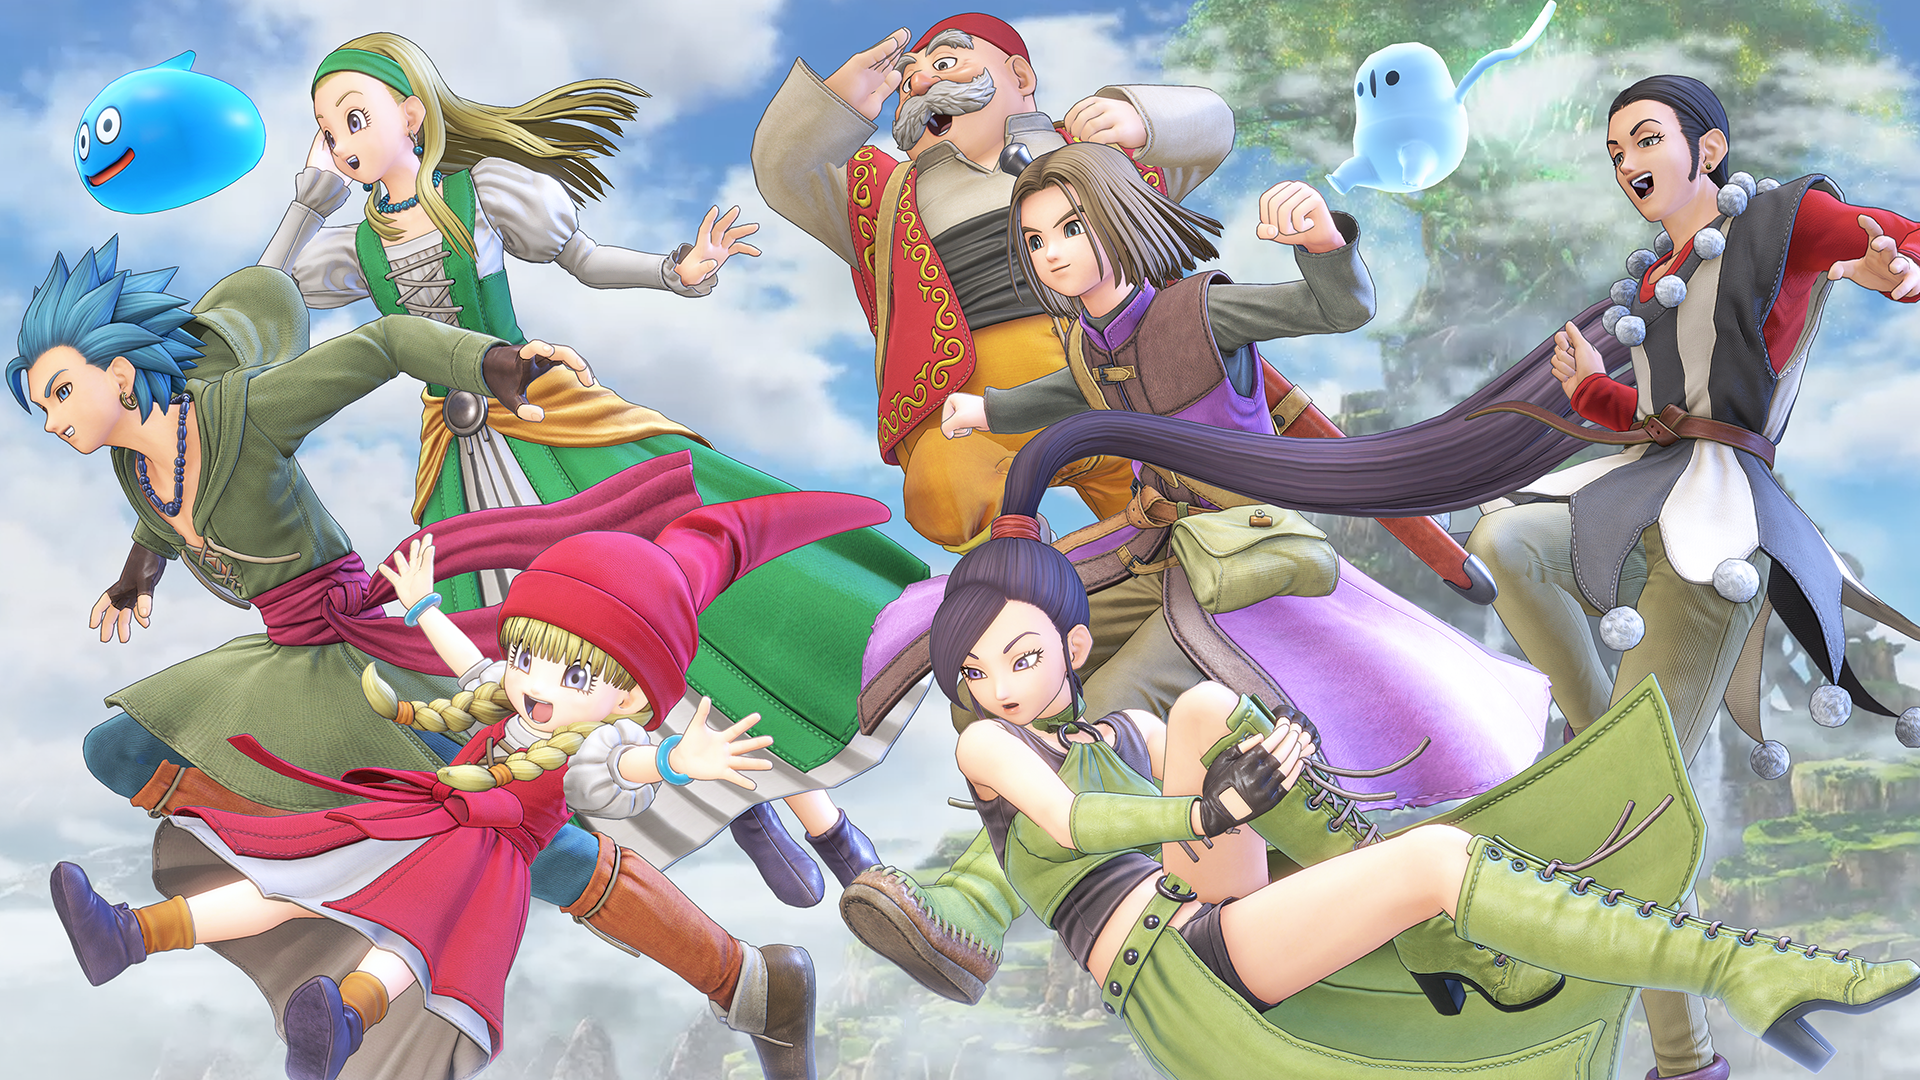 Dragon Quest Xi S Demo Download Available Now On Ps4 Xbox One And Pc